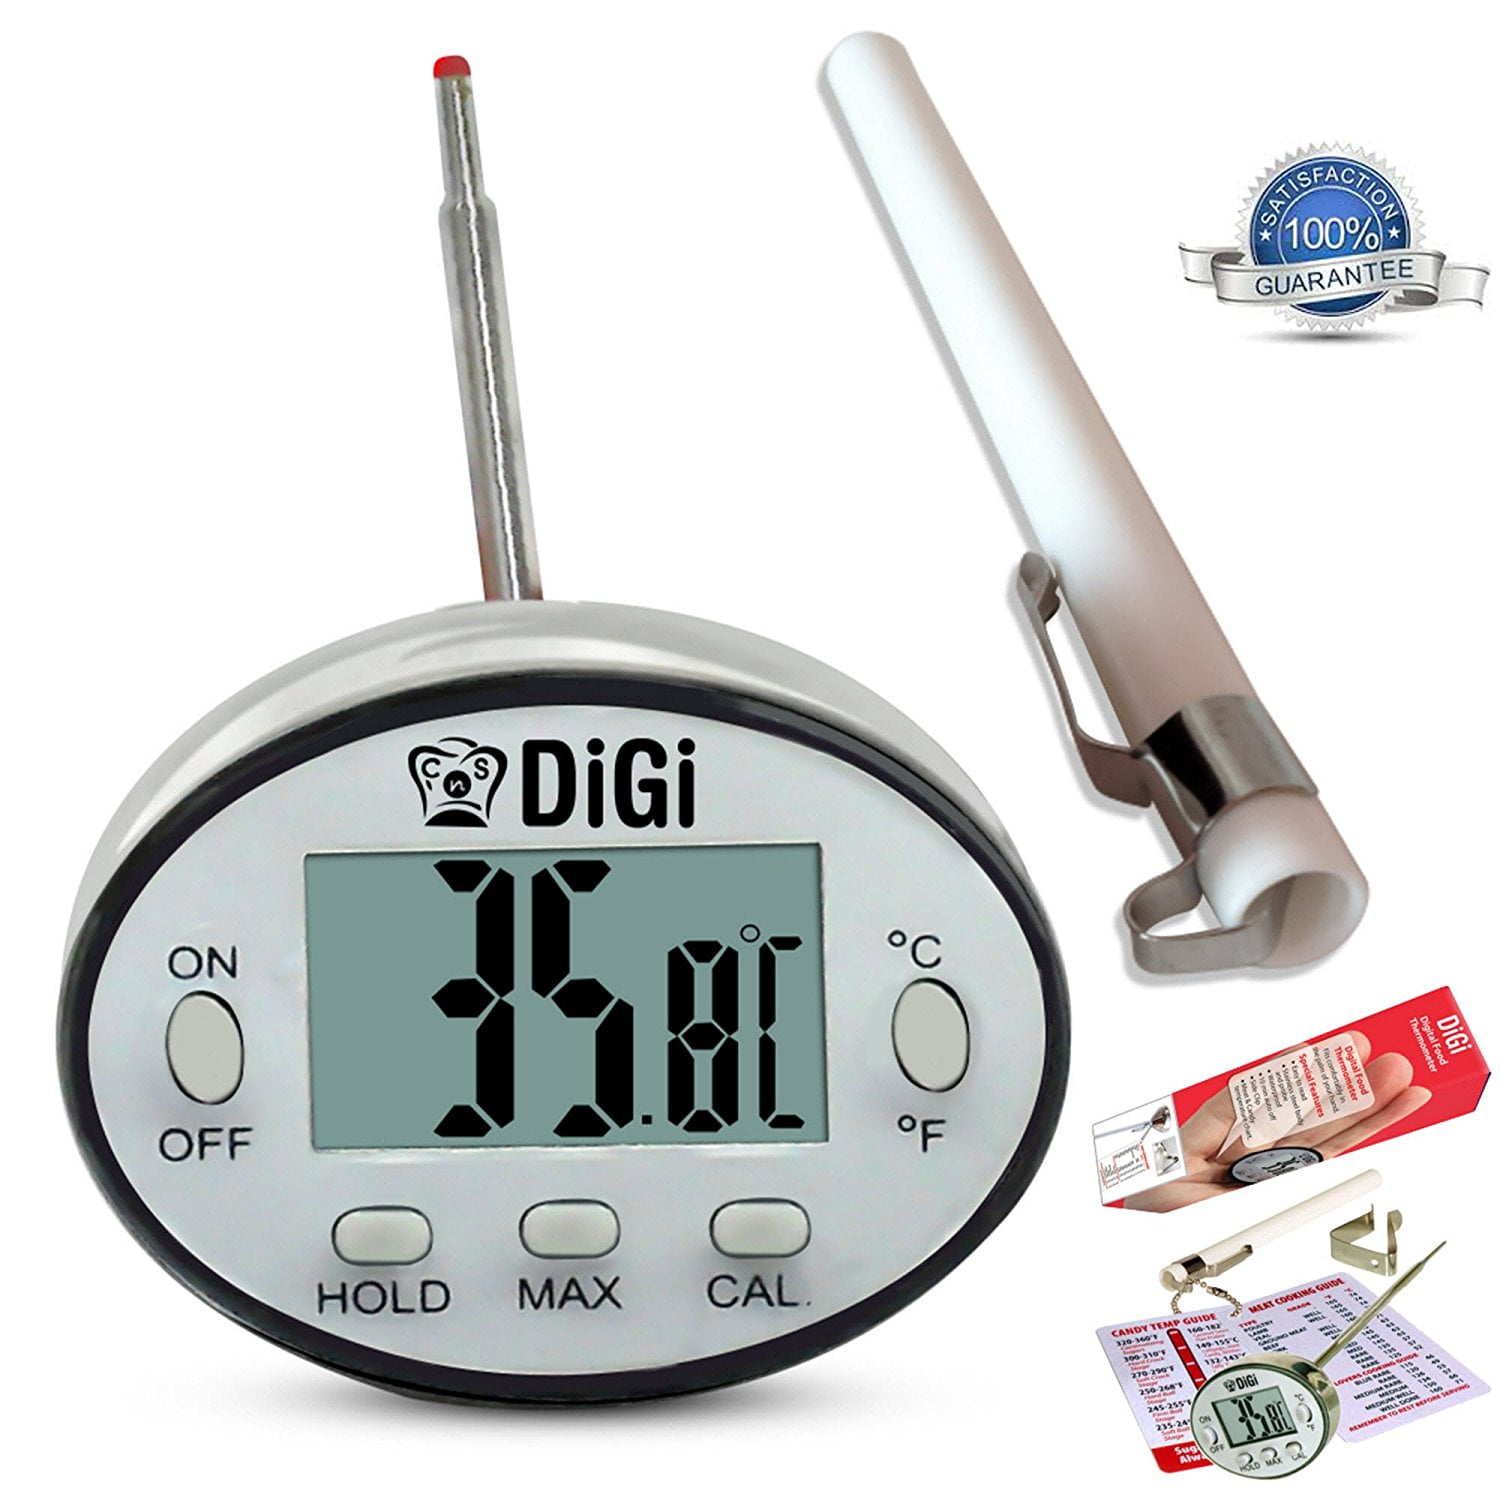 Digital Meat Thermometer with Instant Read - Thin Stainless Steel Probe for  Cooking and Grilling Food to Perfection - Kitchen Candy and BBQ Internal  Temperature Guide Plus Side Clip for Liquids. 